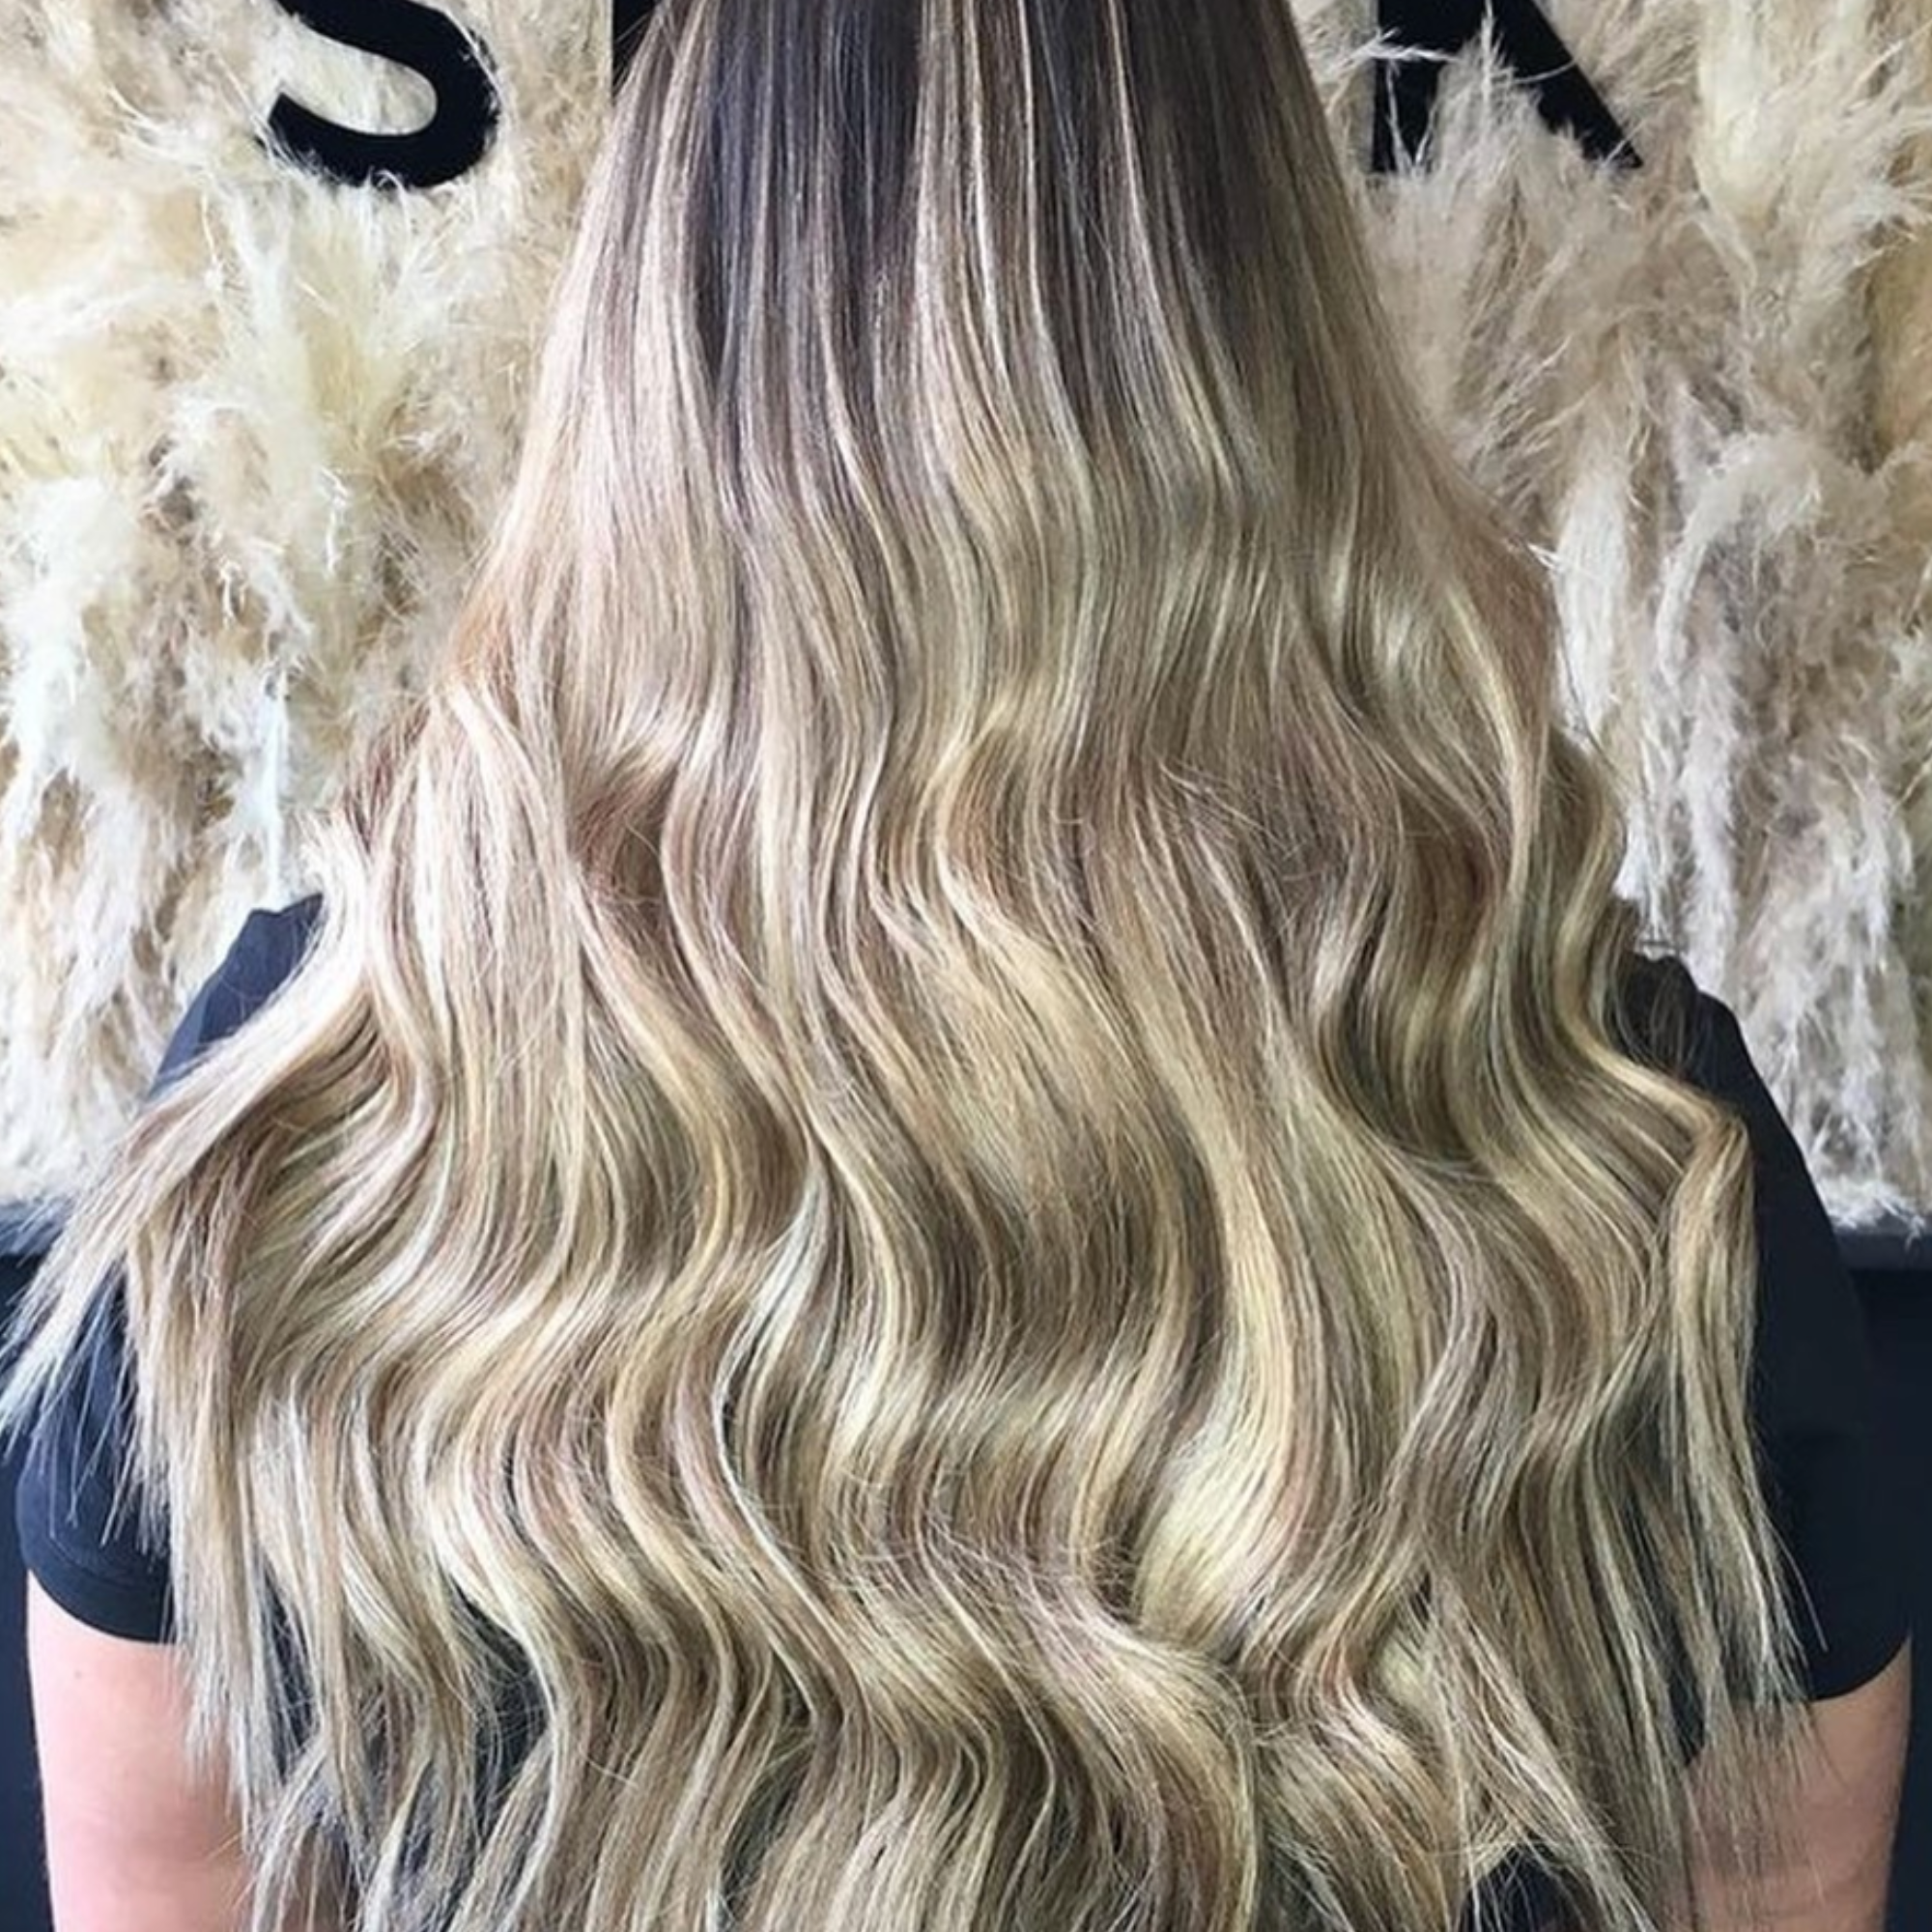 18" Invisible Tape Extensions Rooted Coachella